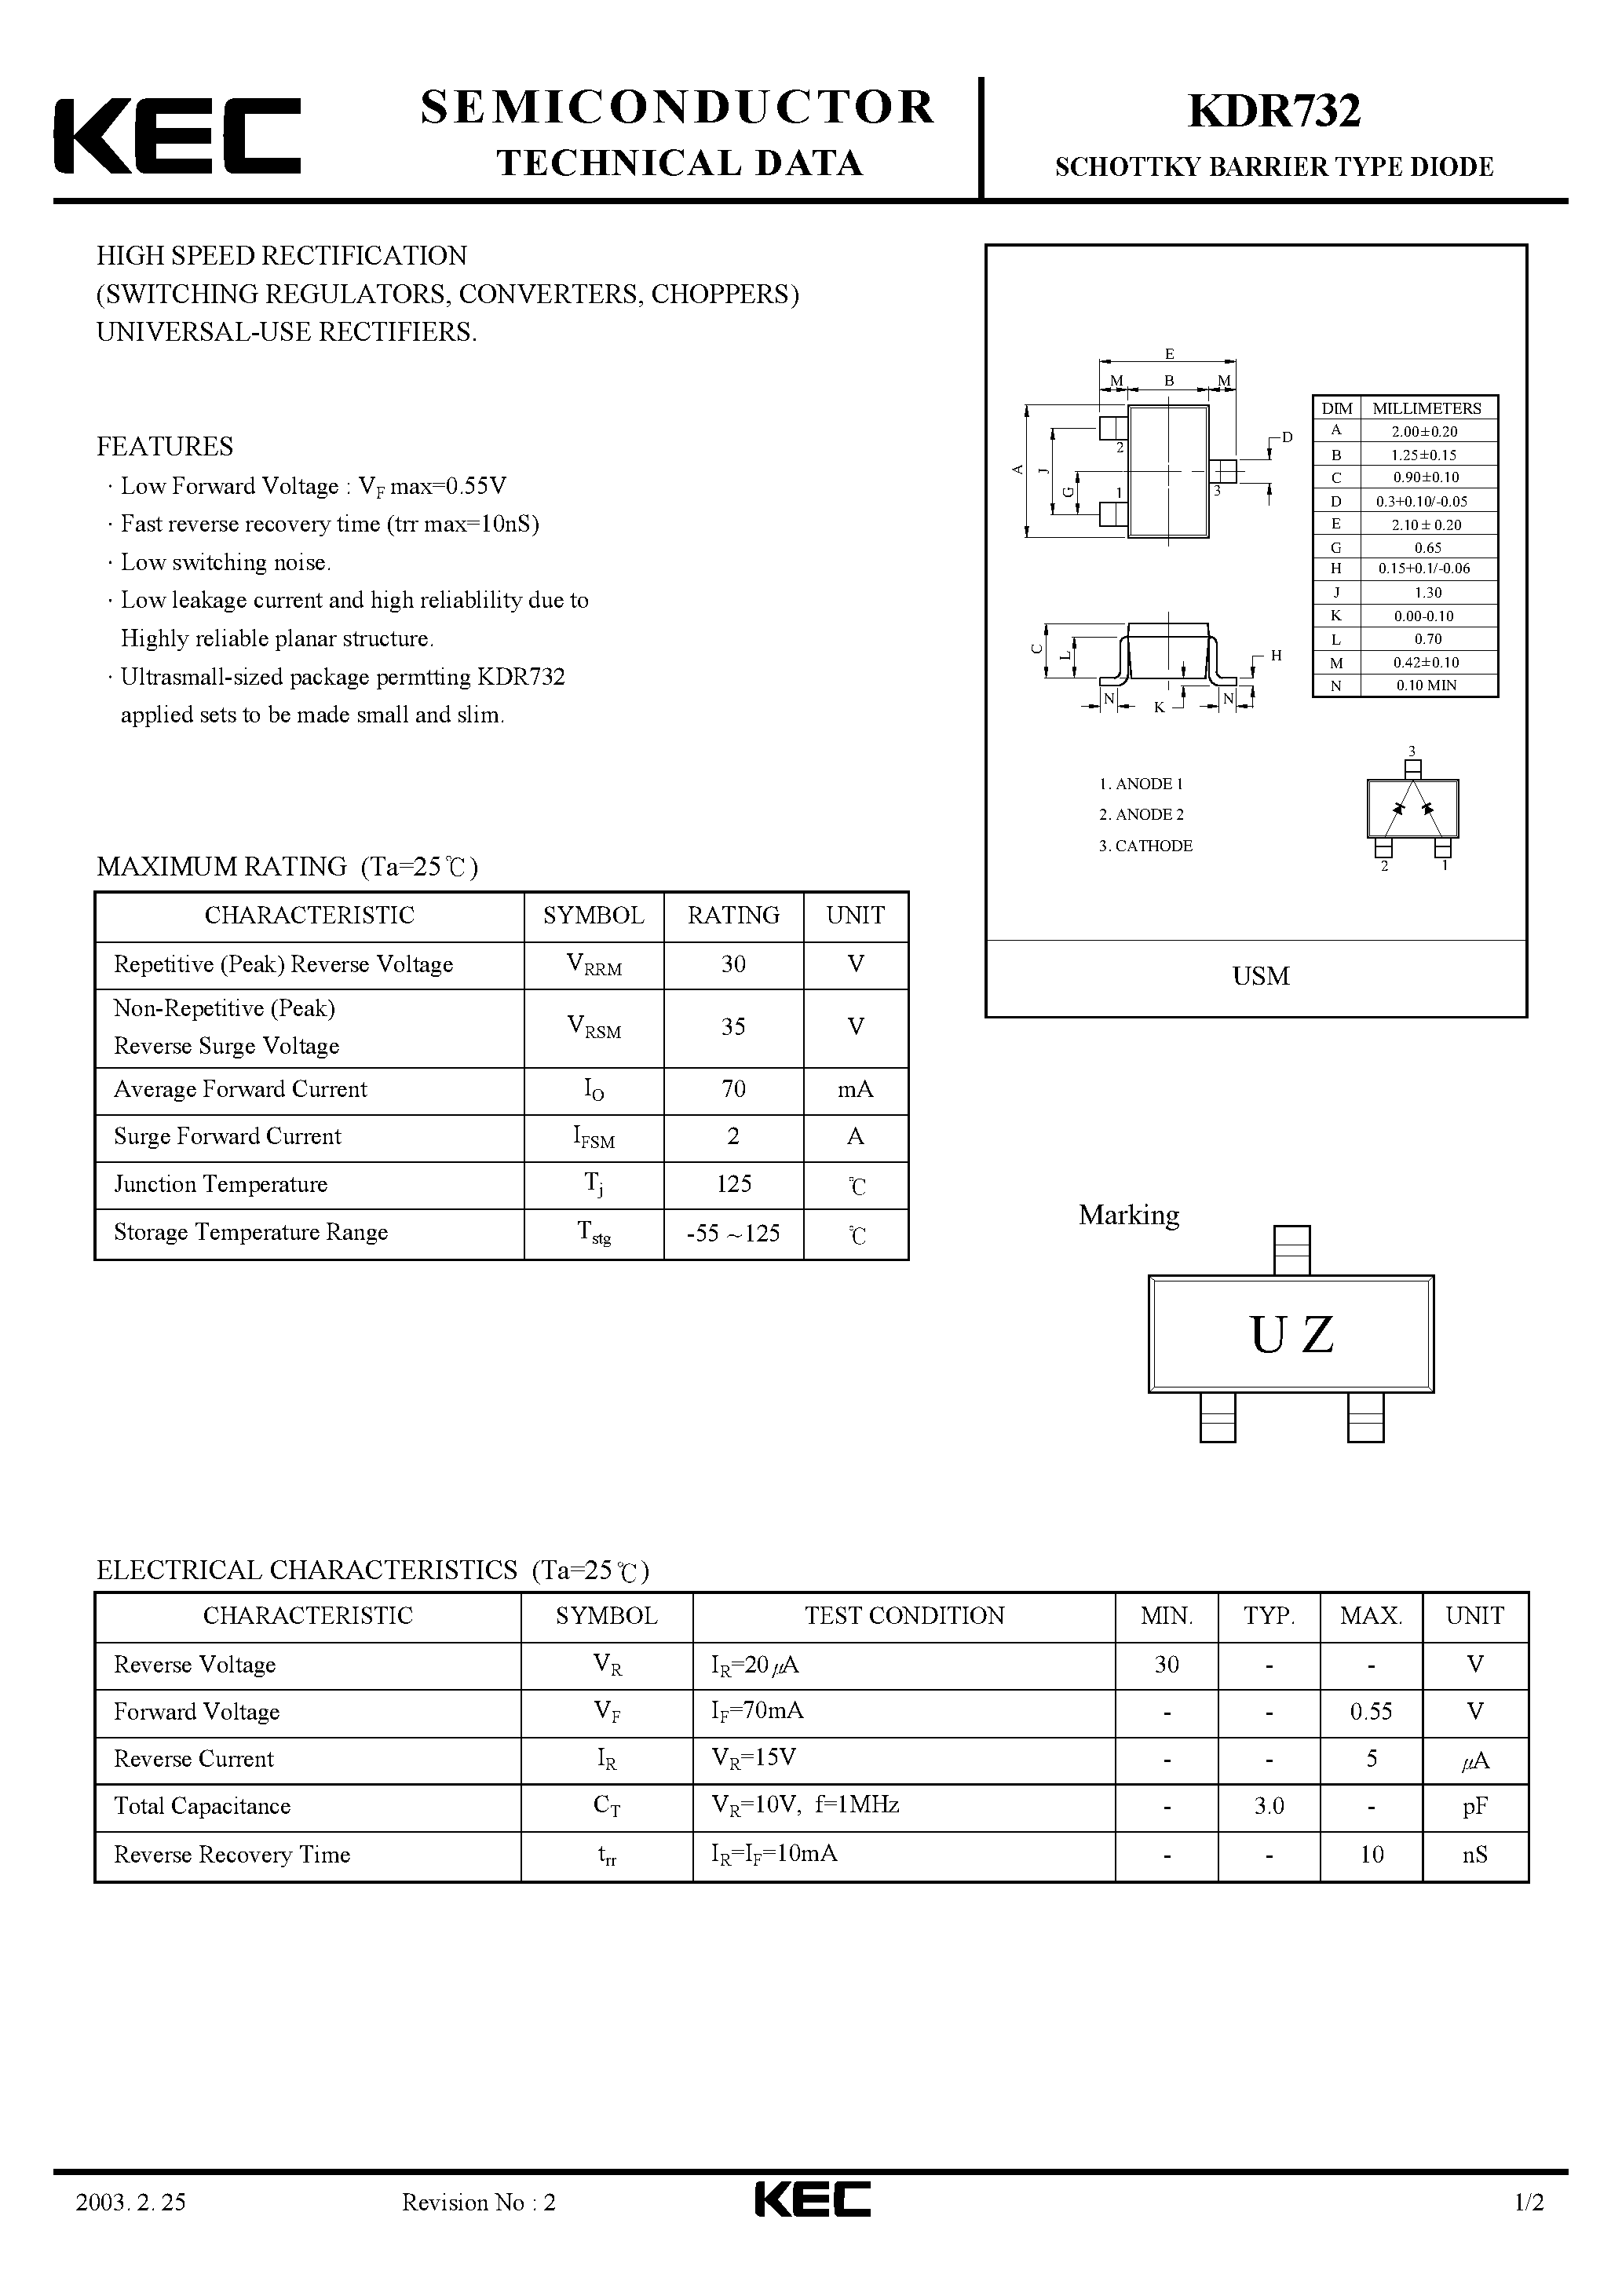 Datasheet KDR732 - SCHOTTKY BARRIER TYPE DIODE(HIGH SPEED RECTIFICATION) page 1